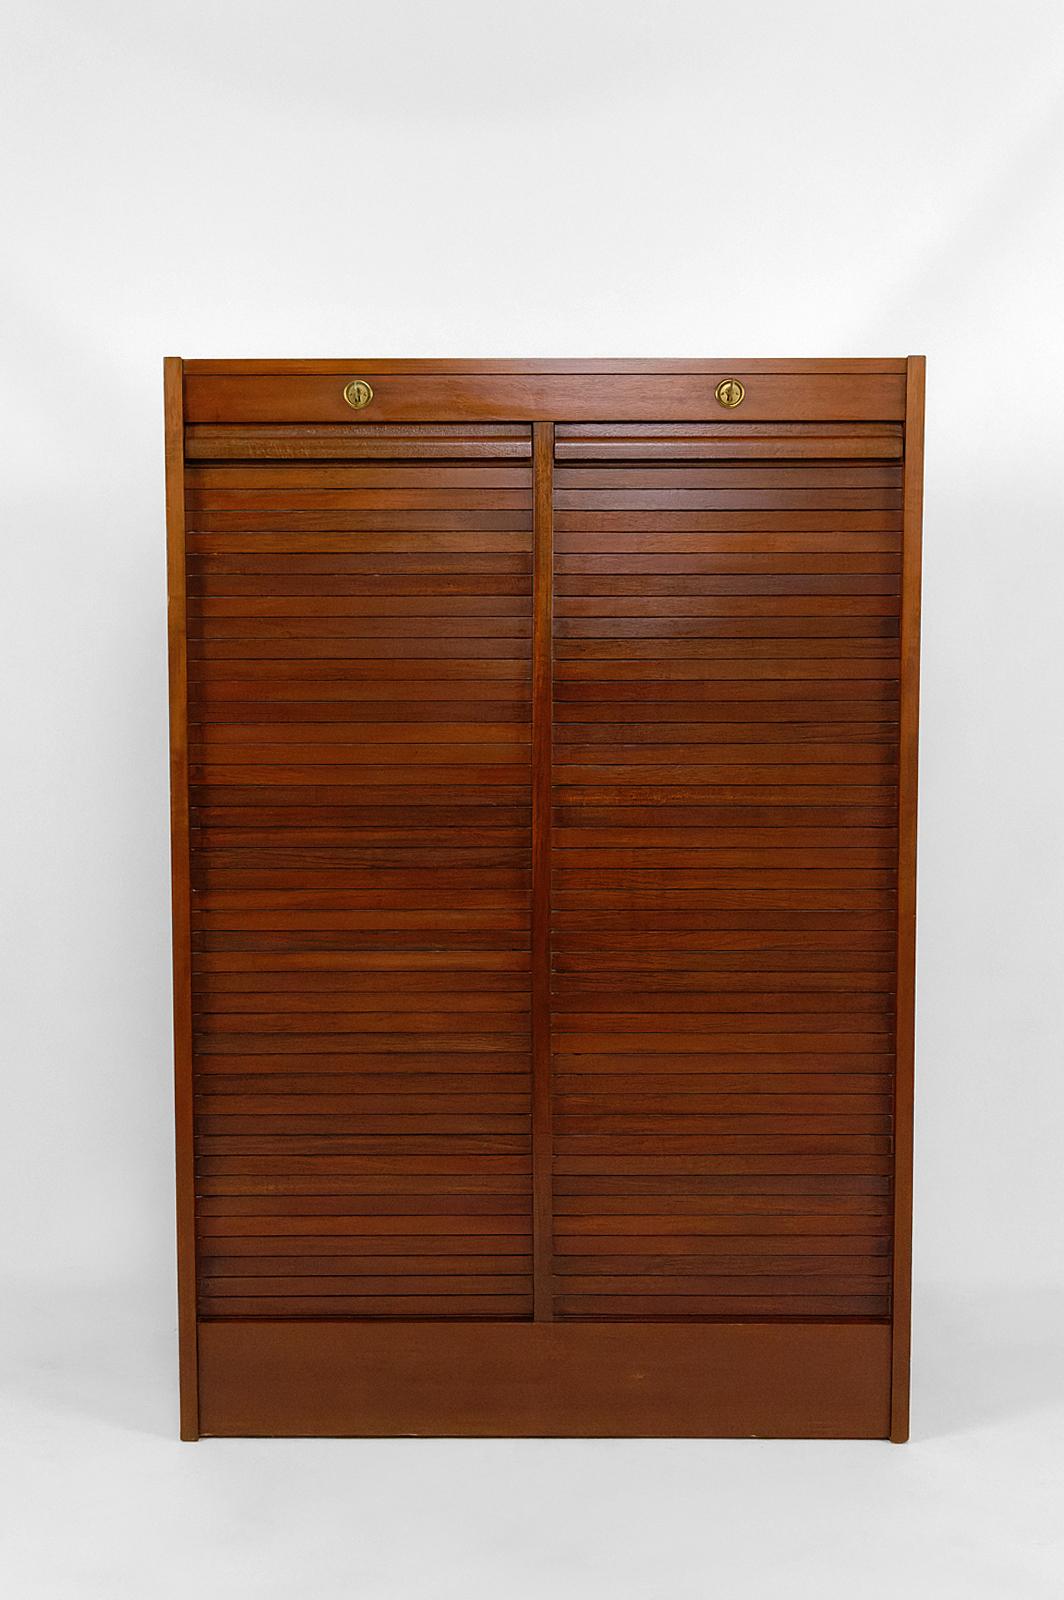 Beautiful professional / notary / filing cabinet, in mahogany.

Composed of 2 boxes closing with curtains.
Inside, numerous modular shelves.

Sorter/binder initially intended for storing archives, but can be suitable for multiple uses (bookcase,